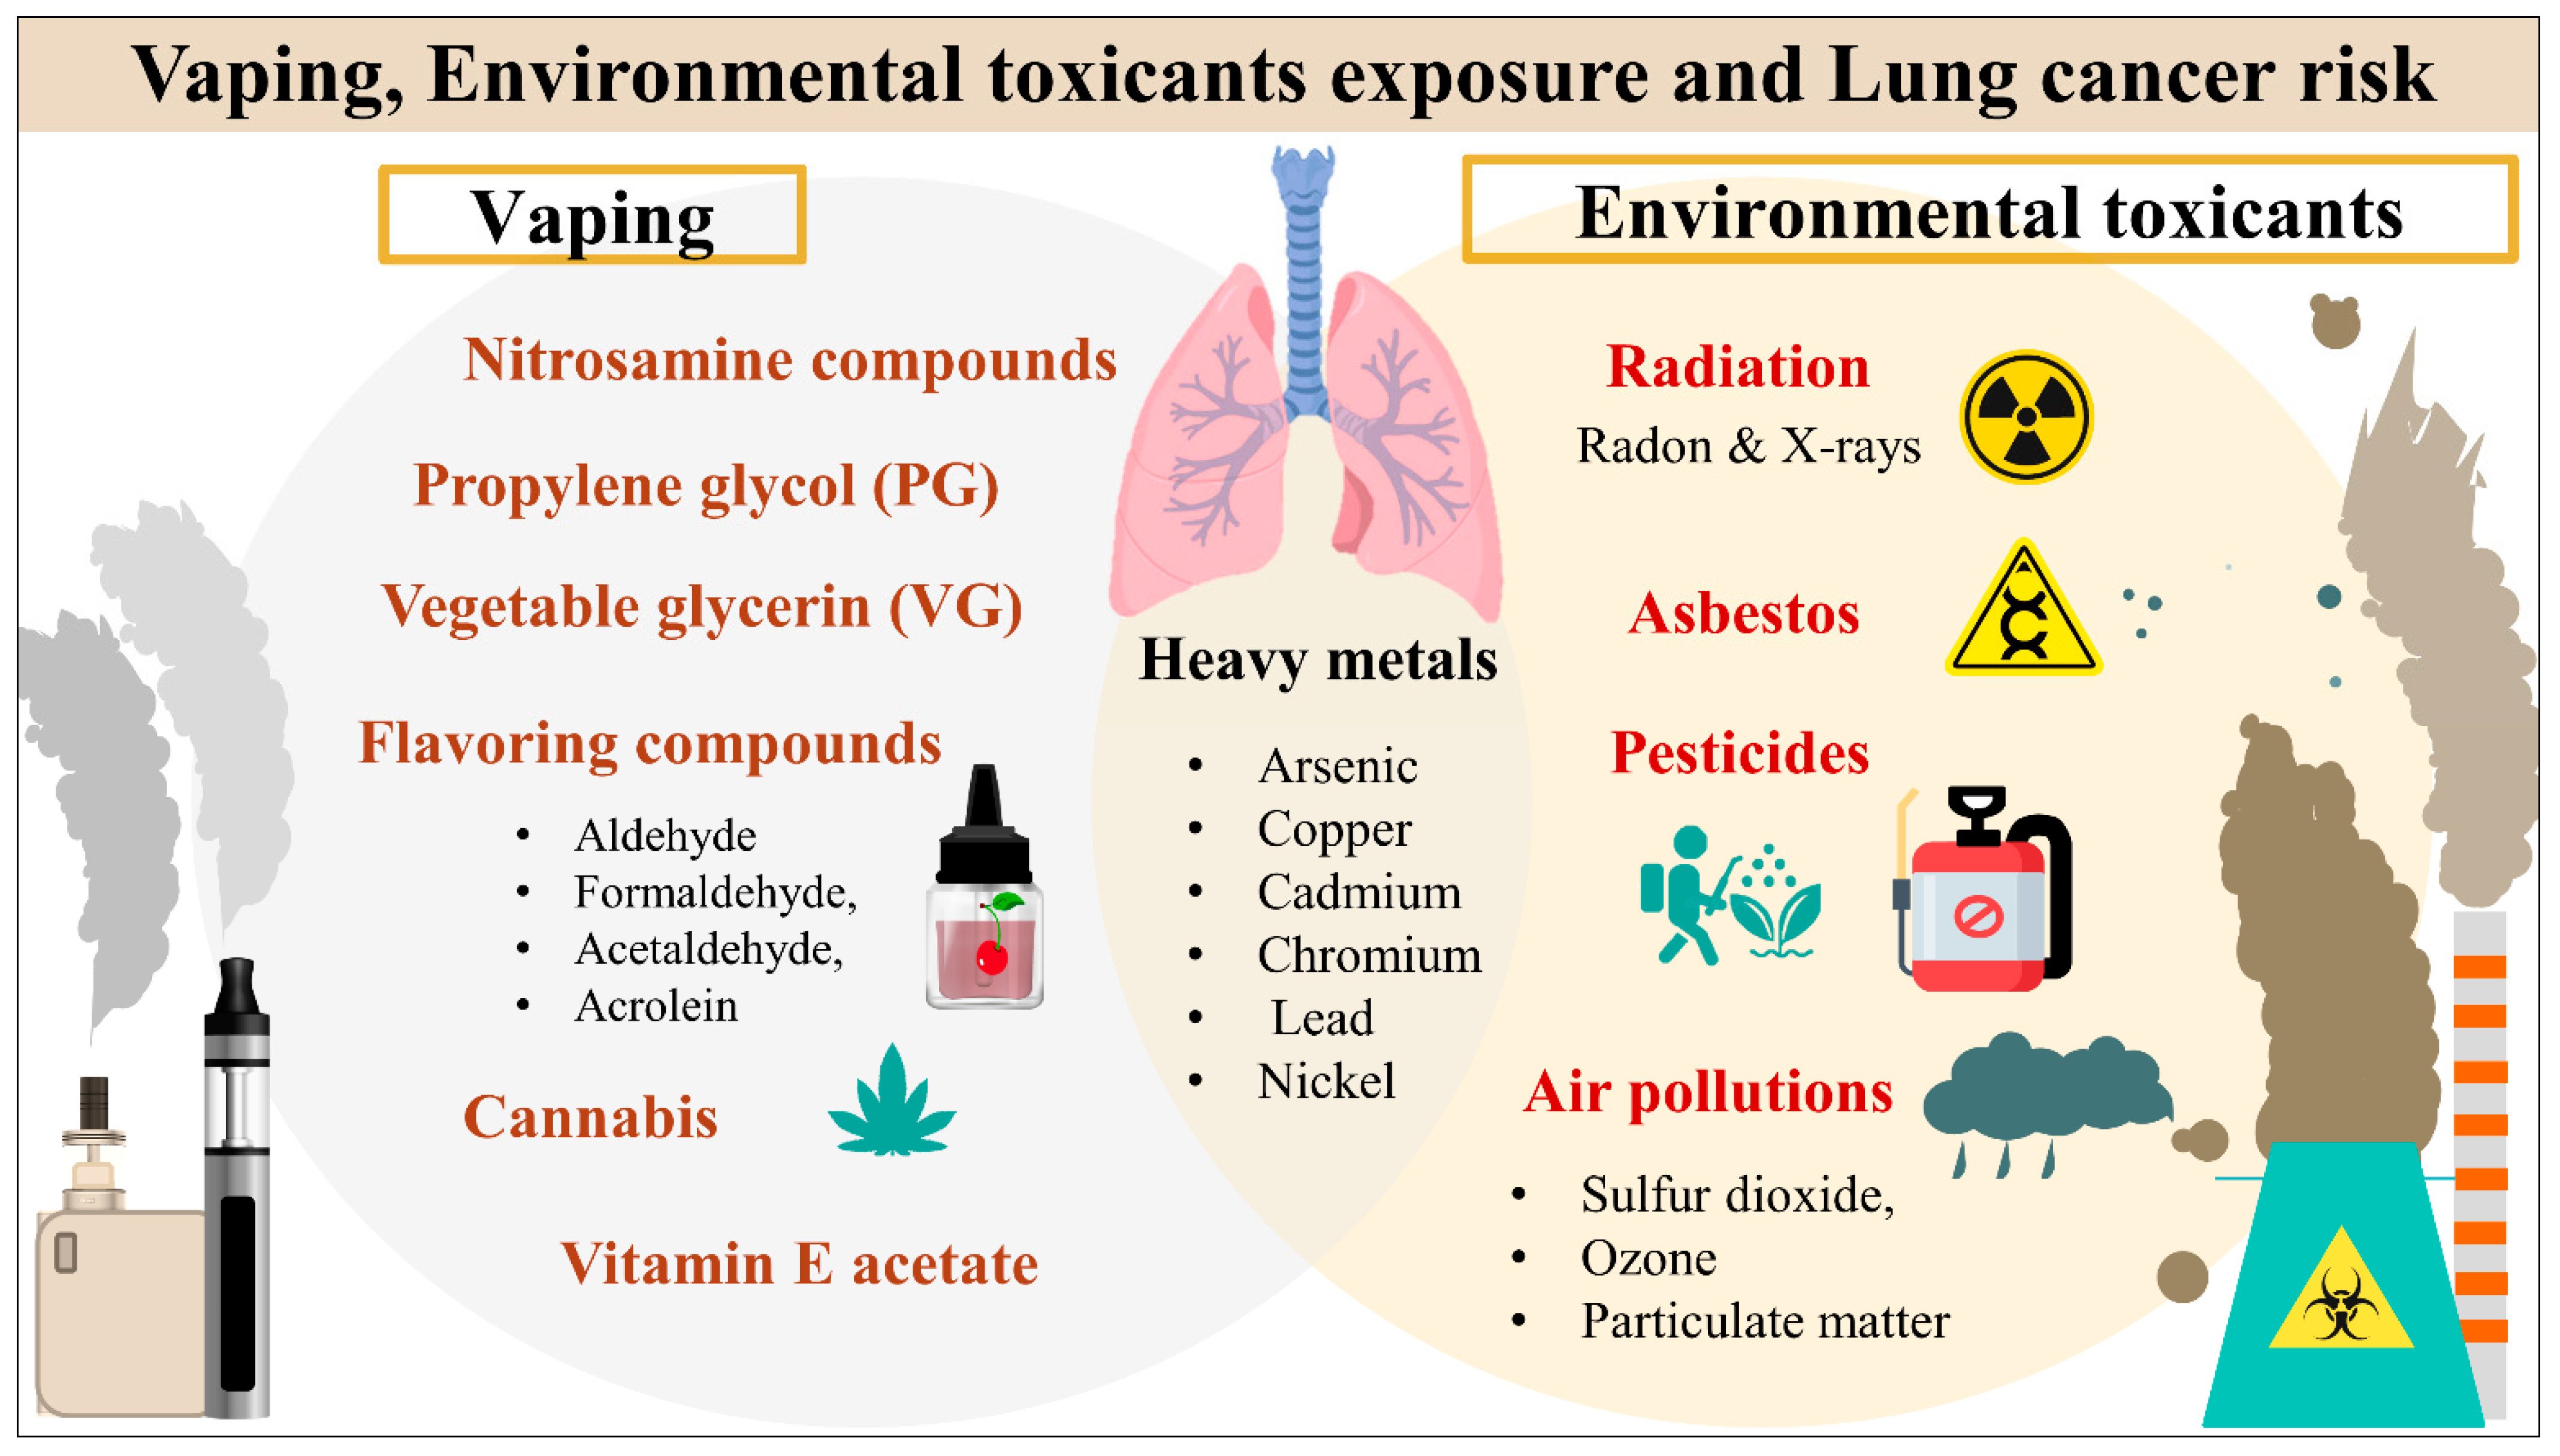 Vaping toxicants exposure and lung cancer risk